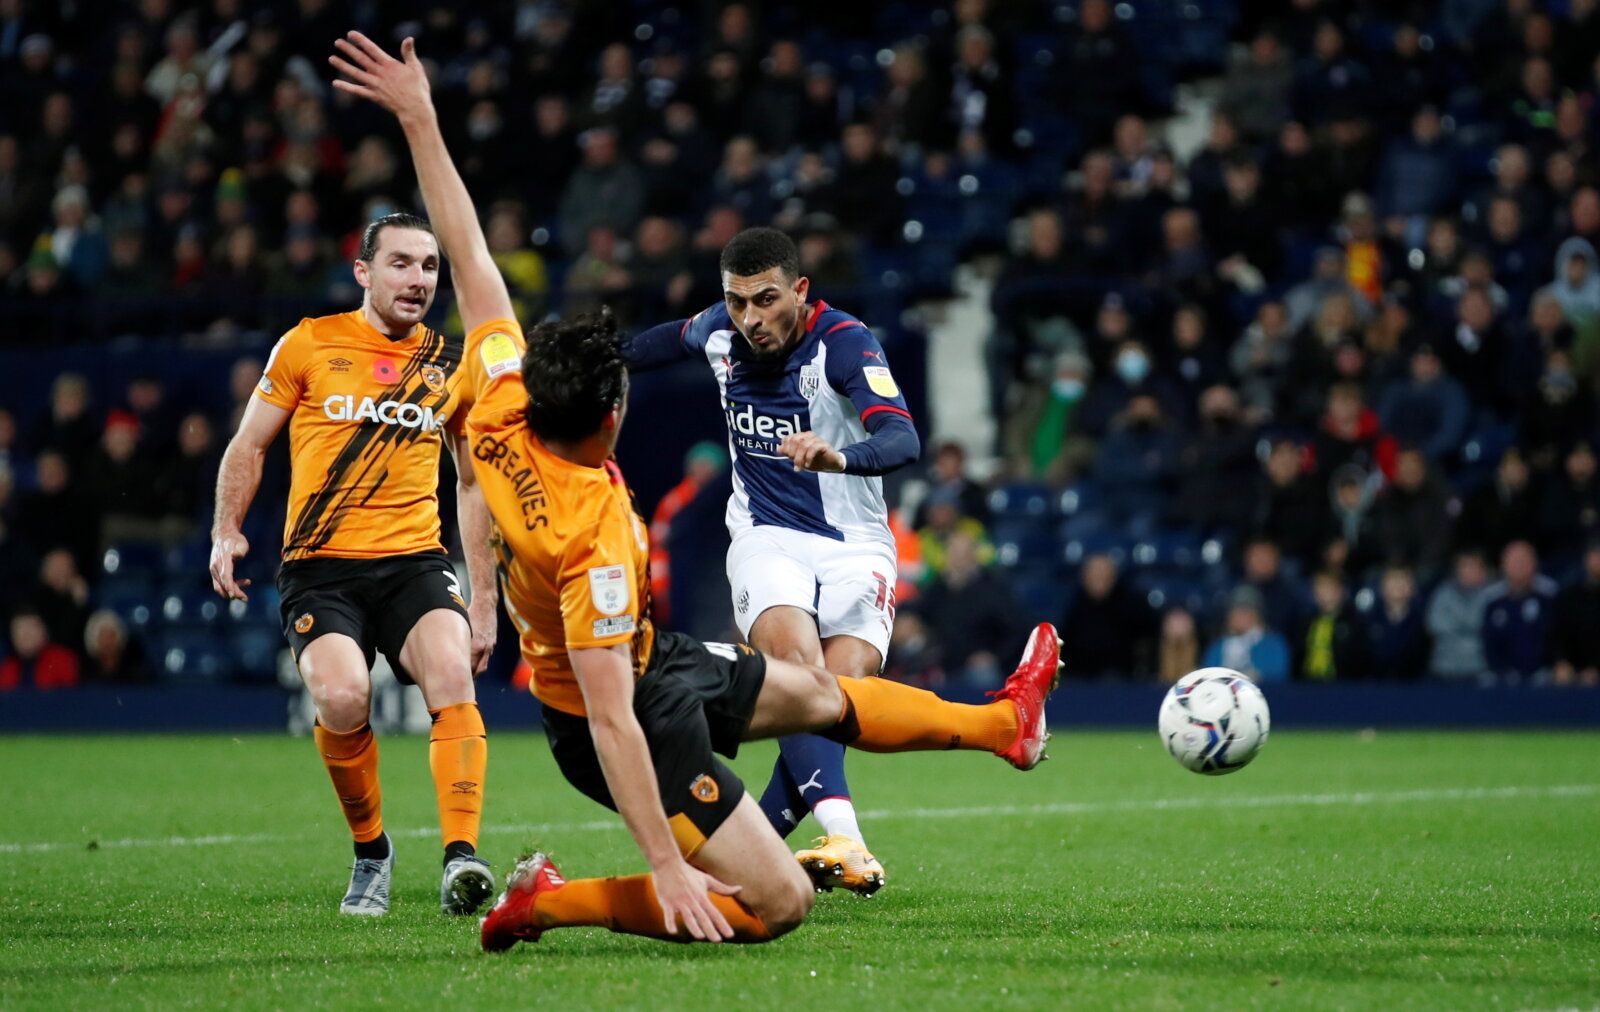 Soccer Football - Championship - West Bromwich Albion v Hull City - The Hawthorns, West Bromwich, Britain - November 3, 2021  West Bromwich Albion?s Karlan Grant scores their first goal  Action Images/Peter Cziborra  EDITORIAL USE ONLY. No use with unauthorized audio, video, data, fixture lists, club/league logos or 